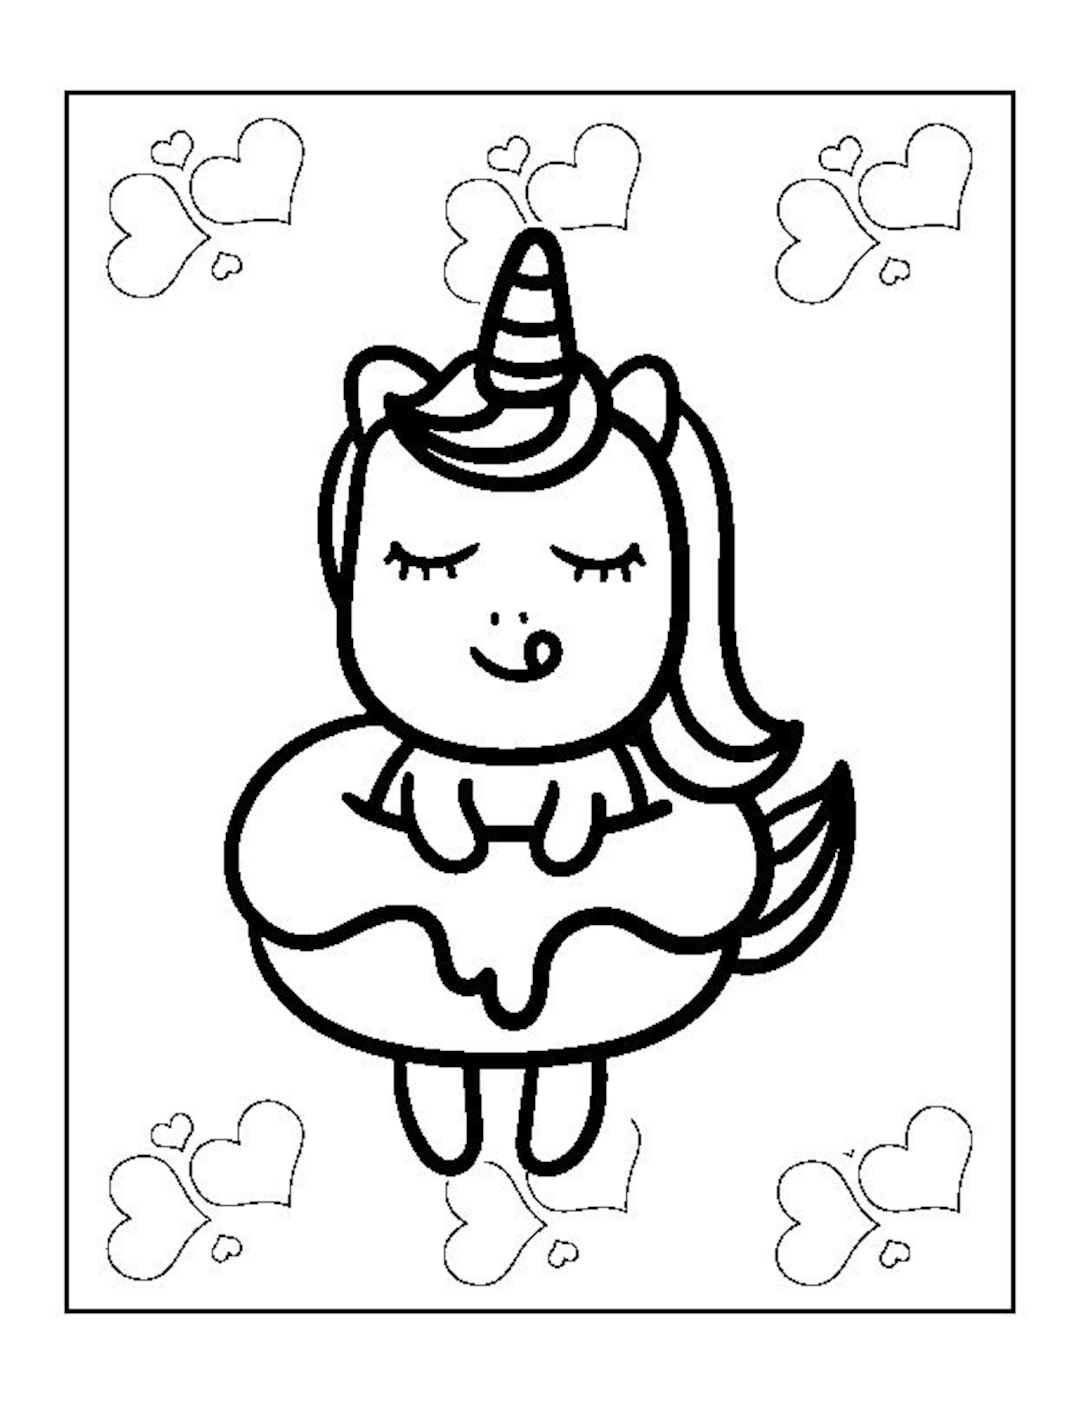 Adorable unicorn coloring pages download now